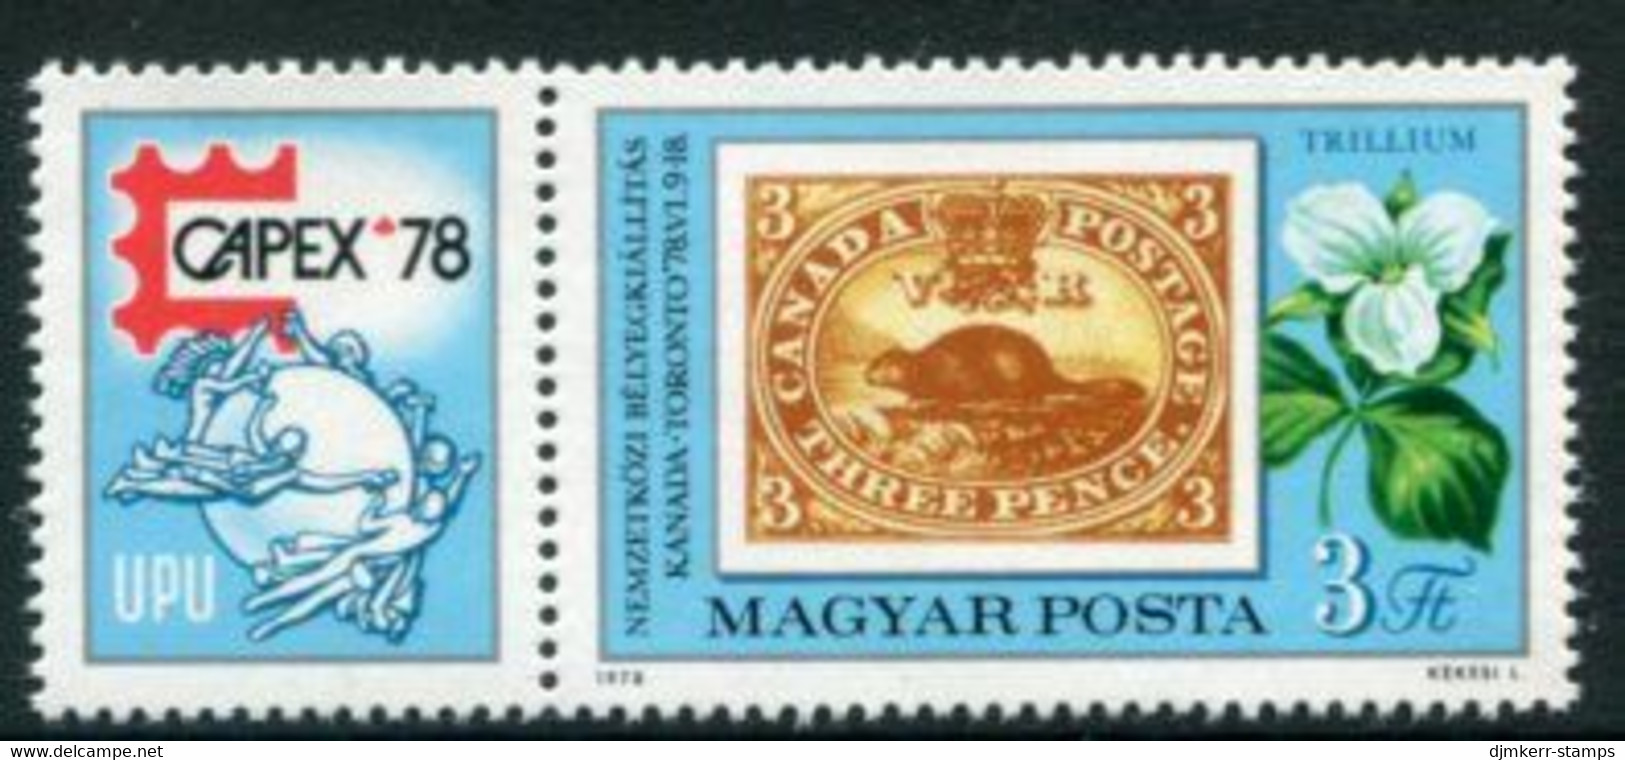 HUNGARY 1978 CAPEX Stamp Exhibition  MNH /**  Michel 3293 - Nuevos